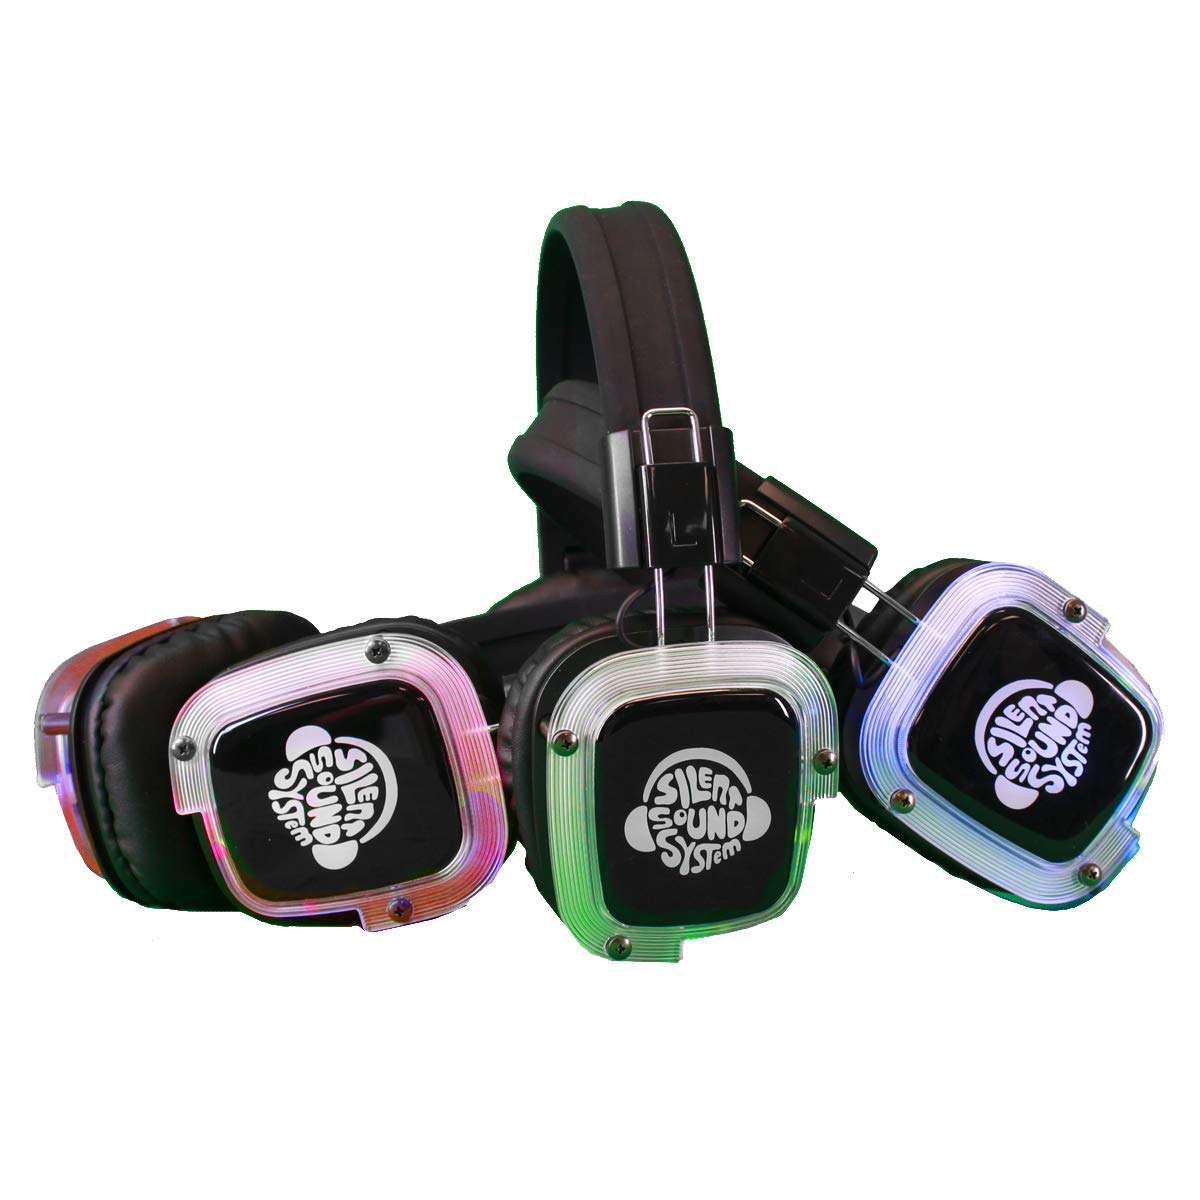 Silent Sound System SilentSoundSystem Silent Disco Headphone Expansion Package (50 Headphones 1 charger) (NO Transmitters Included)